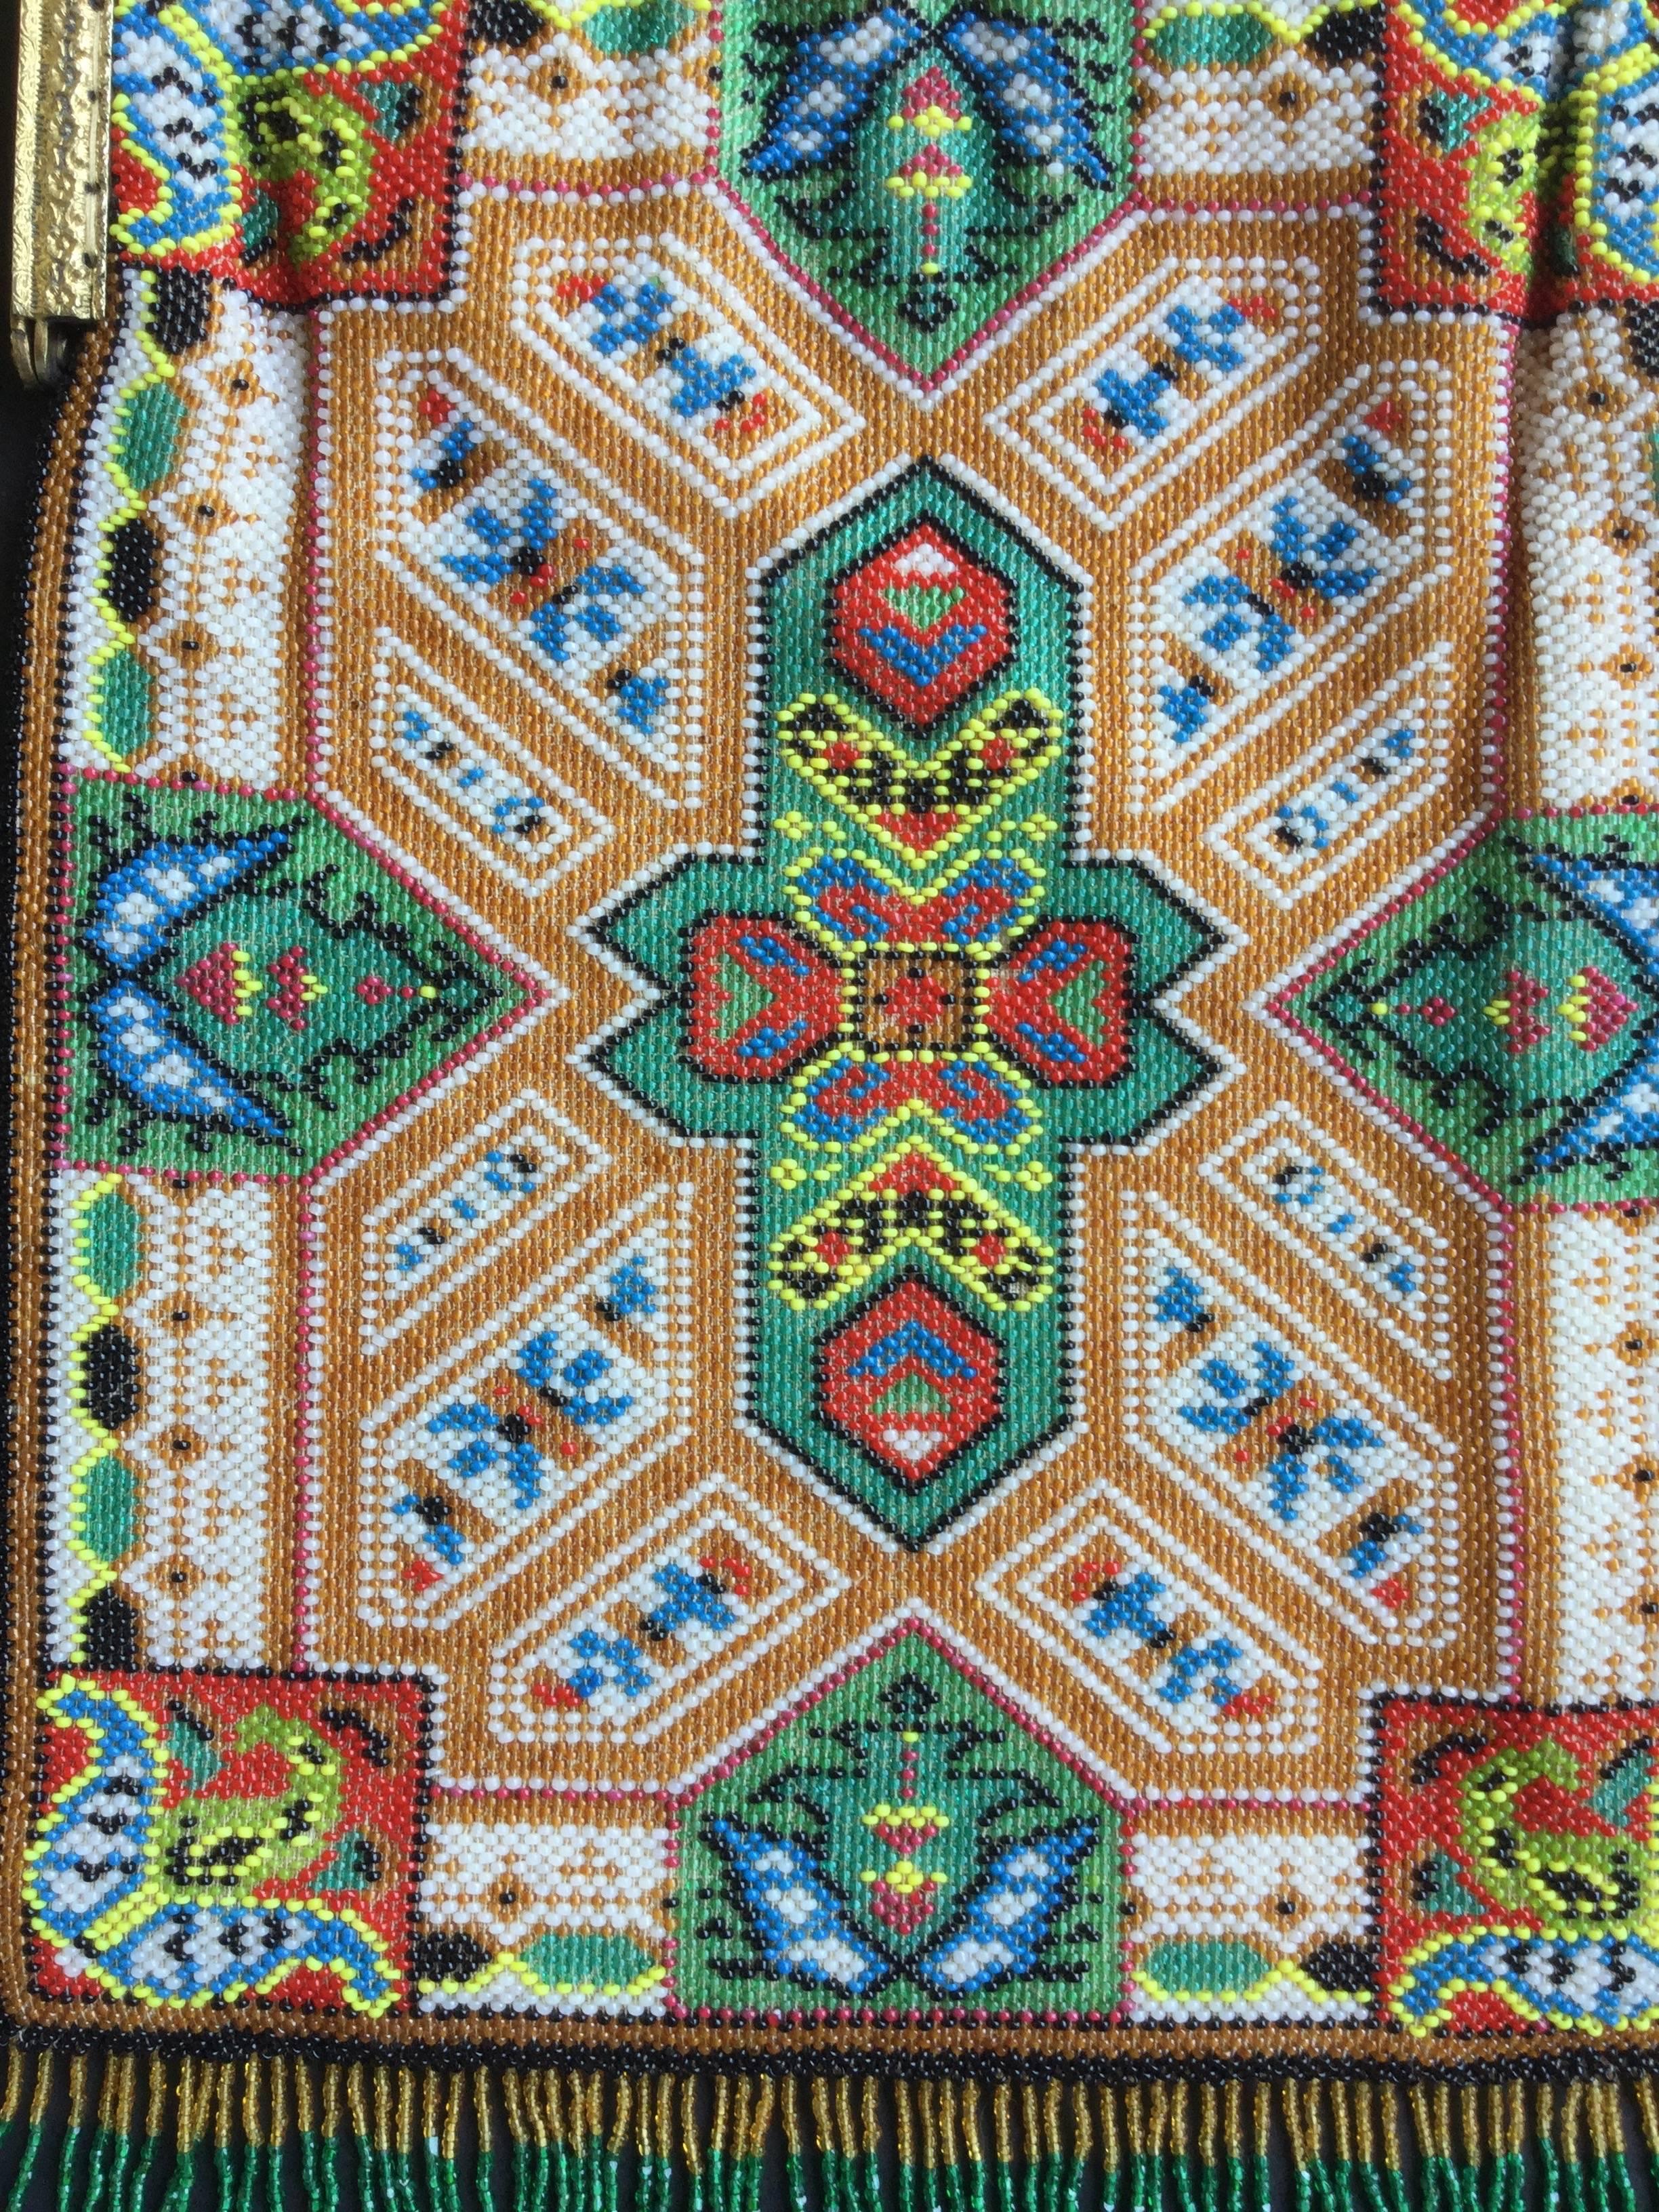 Rare and striking fringed Victorian beaded bag depicting an oriental rug. The detail here is just extraordinary. Thousands upon thousands of tiny glass seed beads have been hand-woven to create this exquisite work of domestic art. The design is the